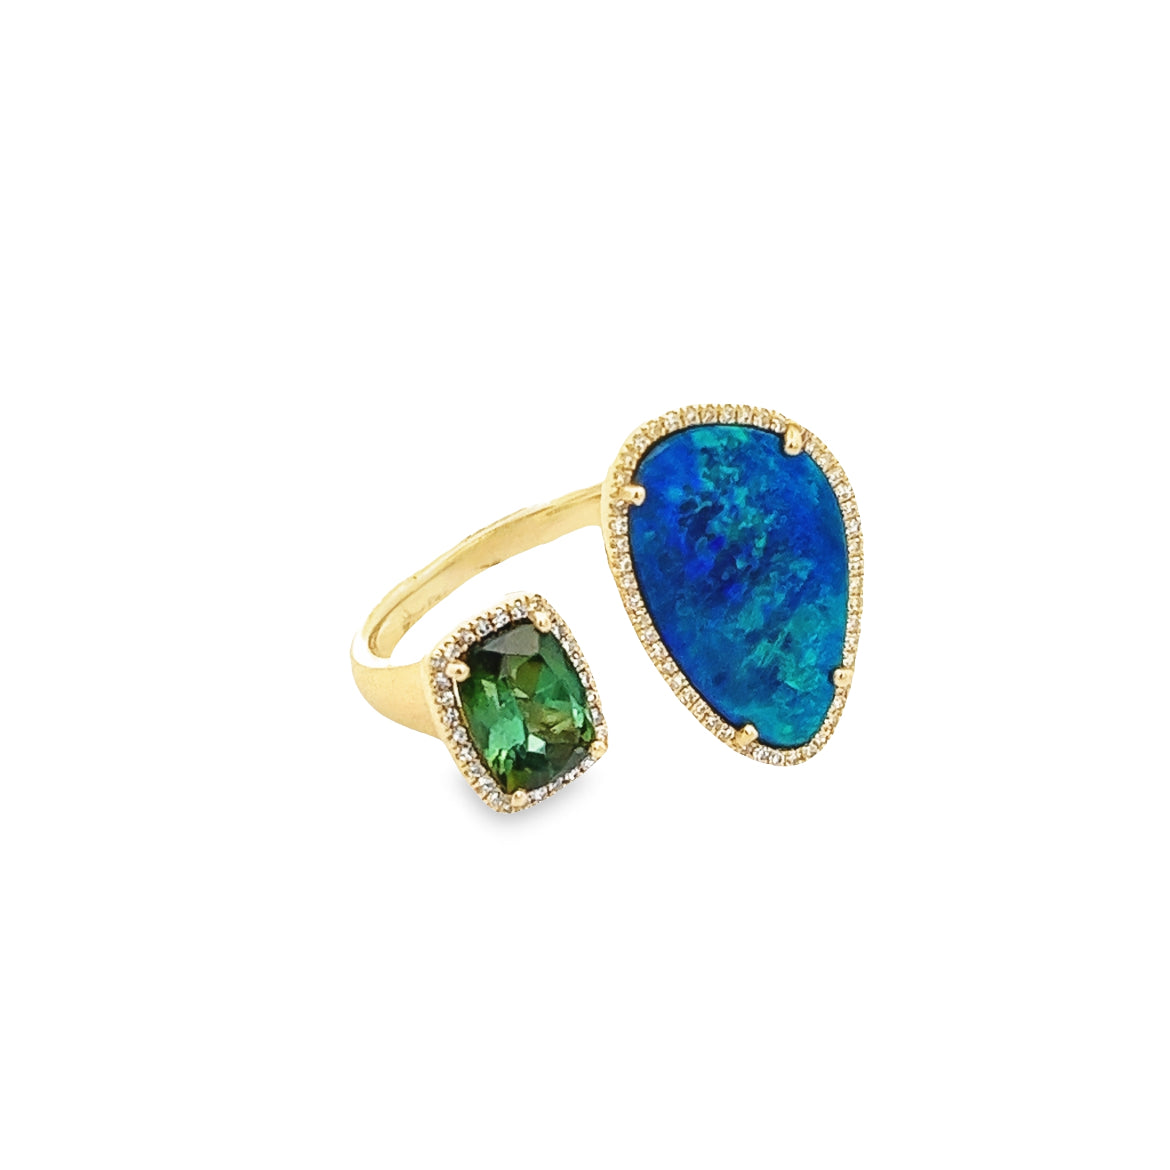 14K GOLD OPAL AND TURMALINE RING WITH HALO